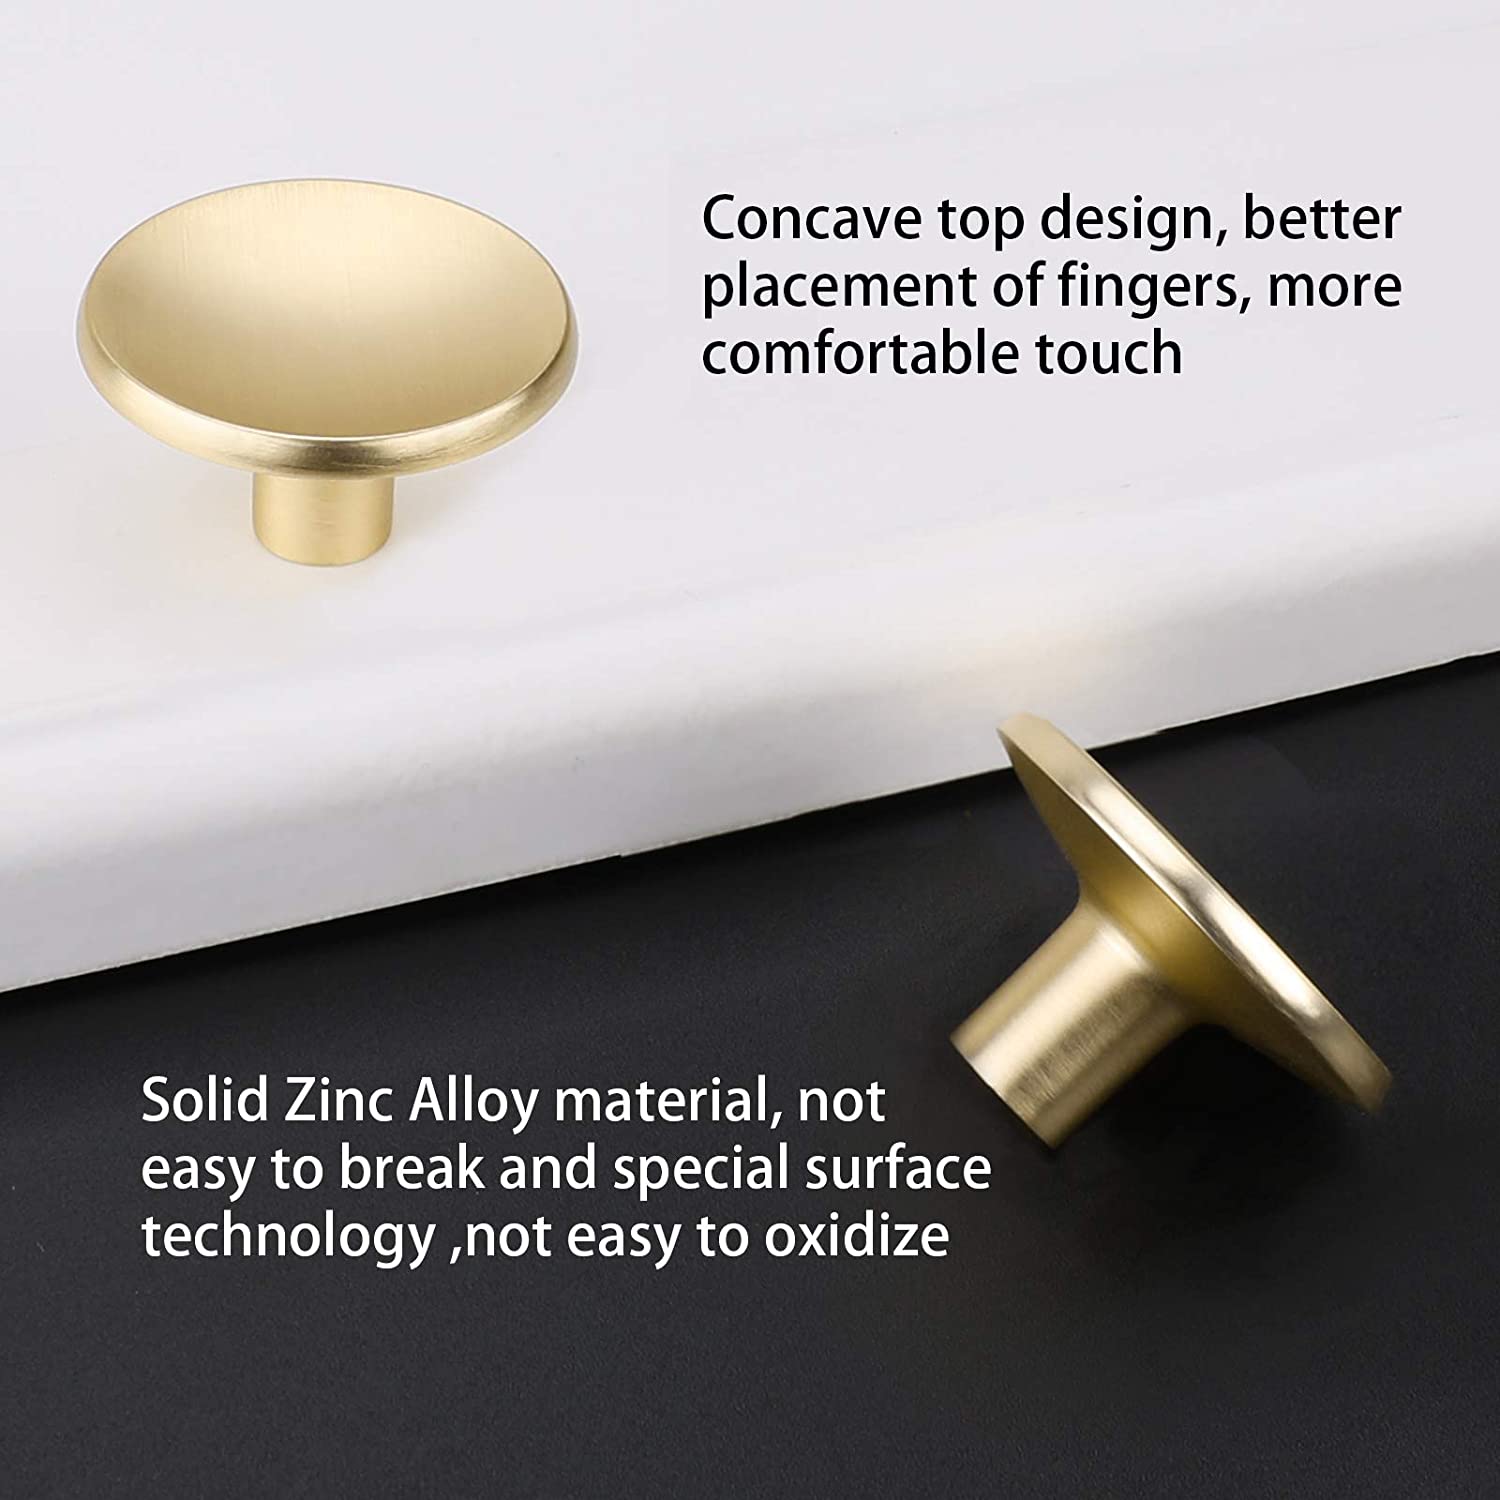 10 Pack Brushed Brass Cabinet Knobs Round Drawer Knobs For Kitchen Cabinets (LS4008GD) -Homdiy